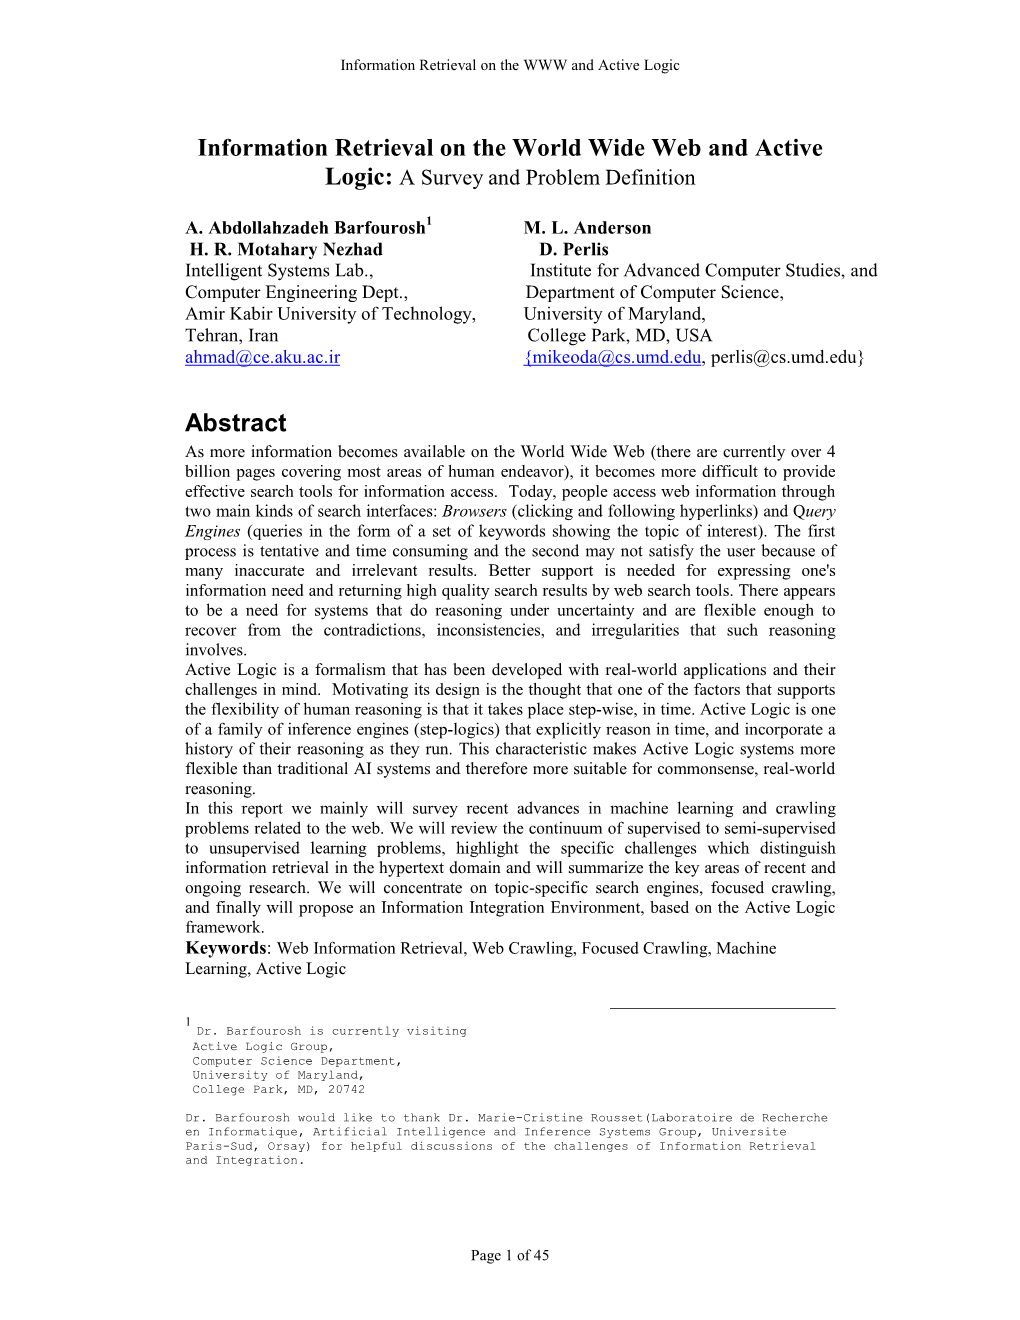 Information Retrieval on the World Wide Web and Active Logic: a Survey and Problem Definition